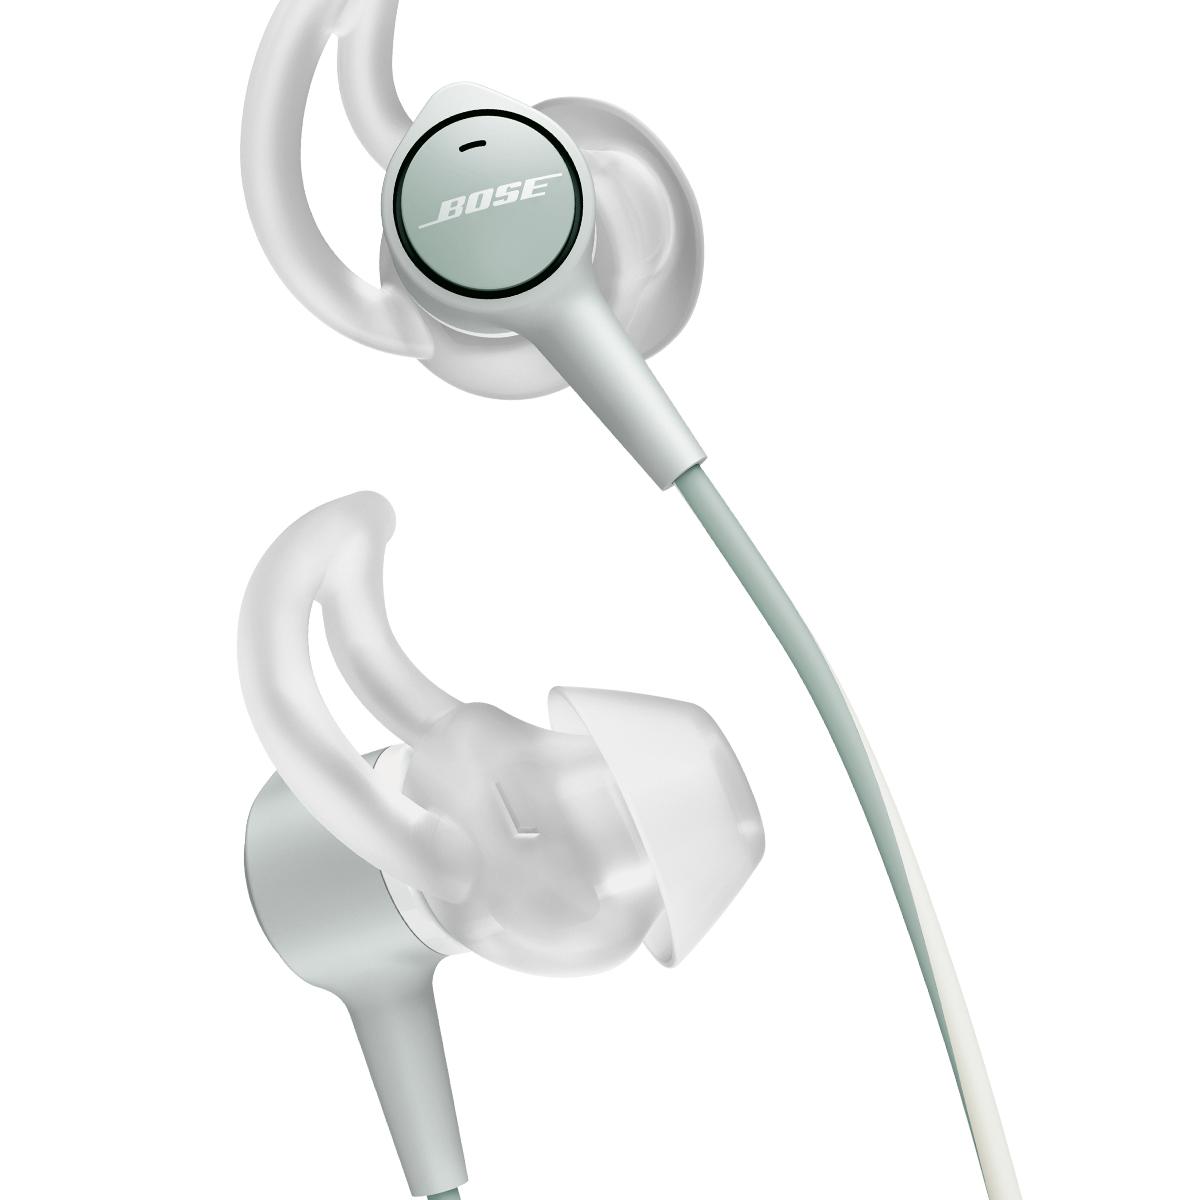 Bose Check Out Our Brand New Soundtrue Ultra In Ear Headphones Here Http T Co 2vc52ezyre Http T Co Gdpuewzuwg